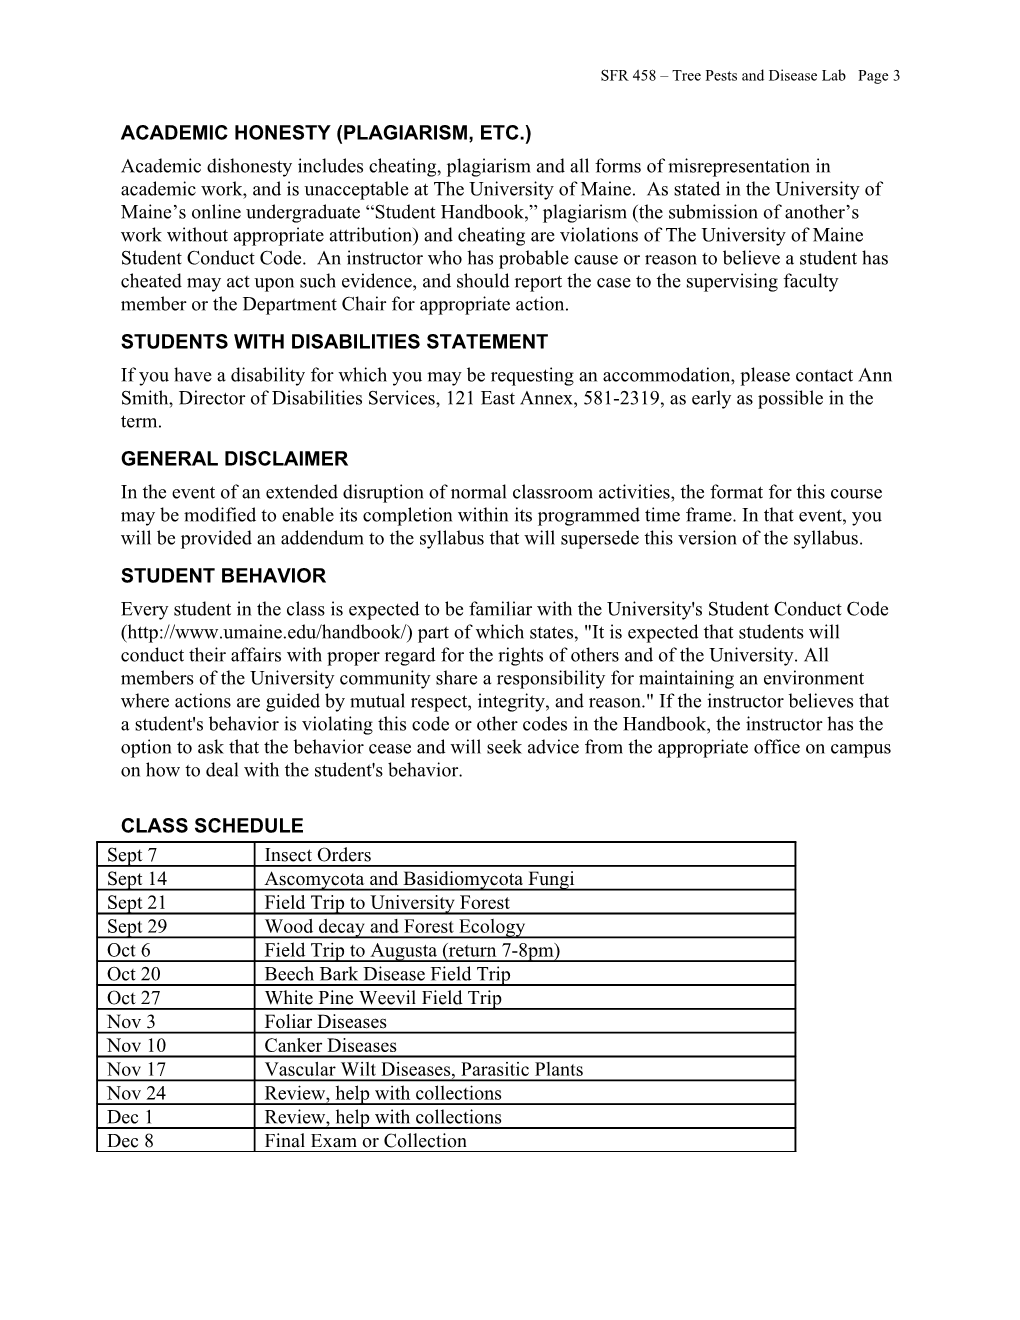 SFR 458 Tree Pests and Disease Lab Page 3